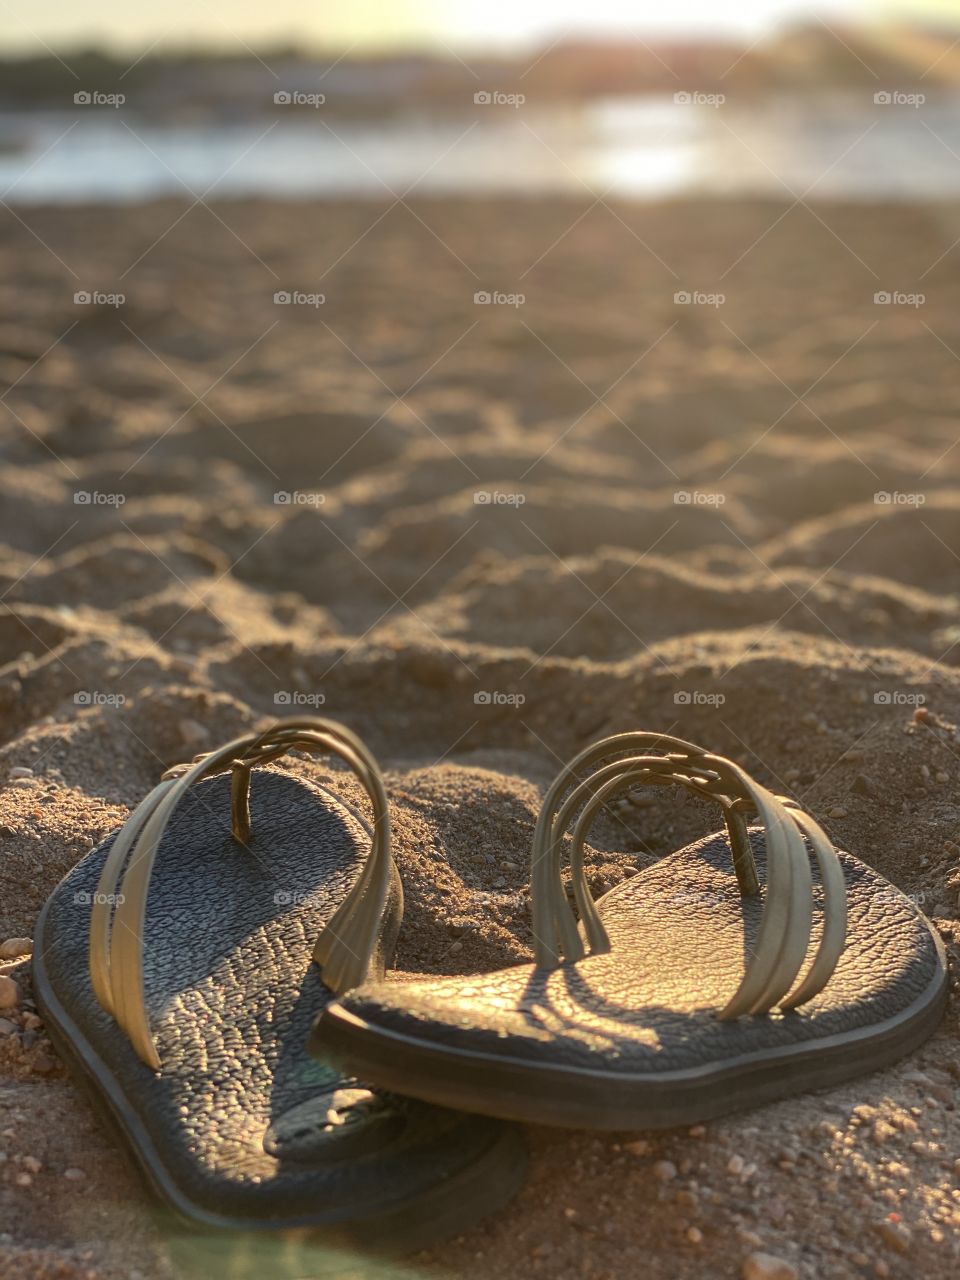 Beautifully naturally lighted photo with women’s sandals in forefront and sun in background. 